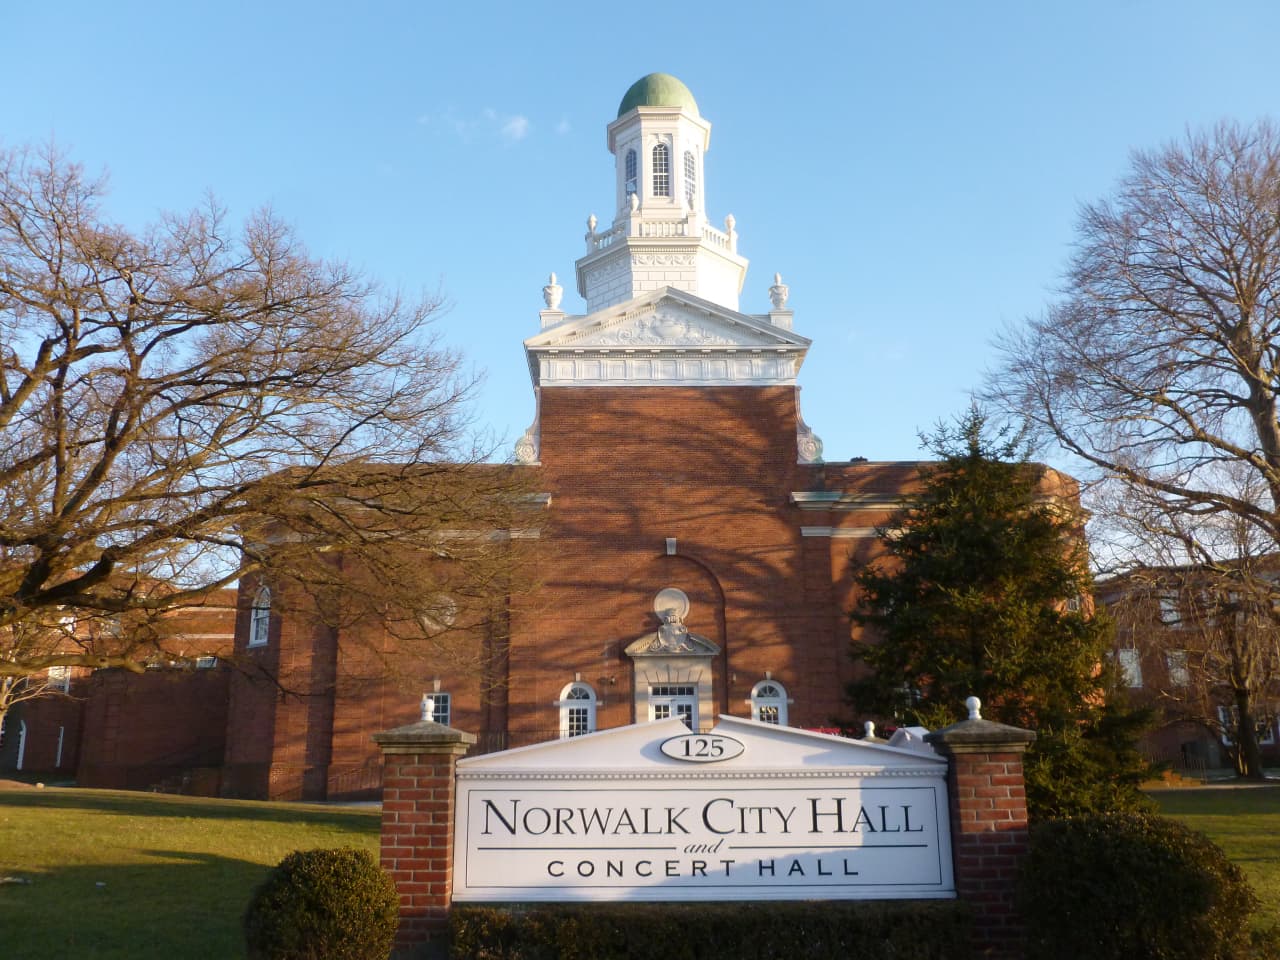 Several municipal buildings, including Norwalk City Hall, have had assisted listening devices installed to help people with hearing impairments.